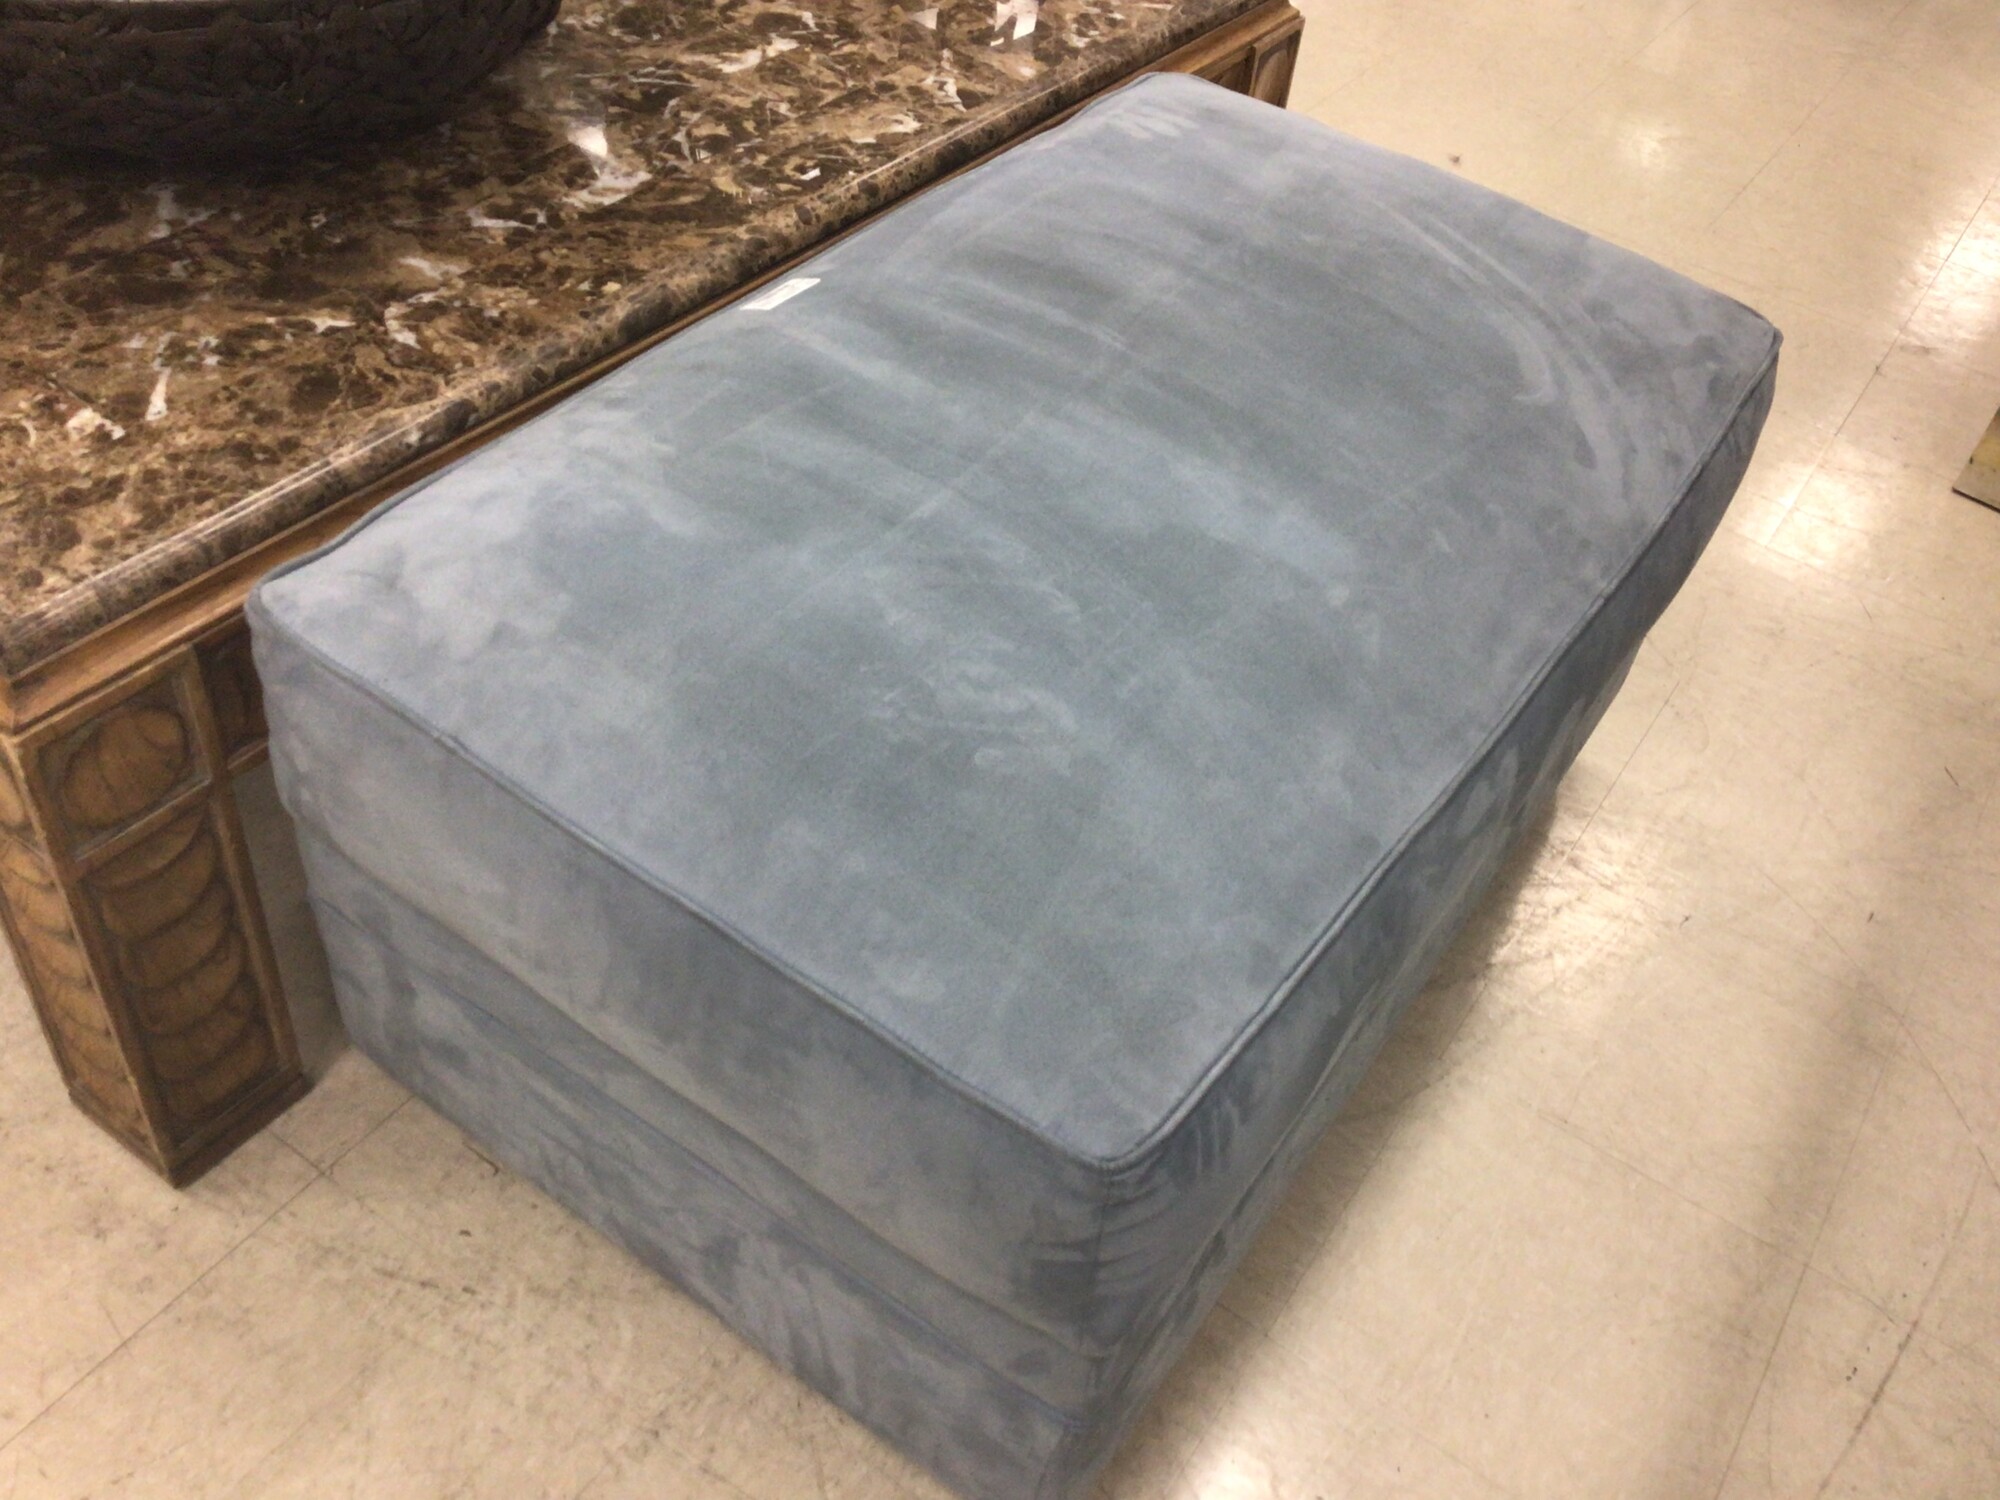 Blue Ottoman W/ Storage, Blue, Square
40 in Long x 25 in Wide x 20 in Tall